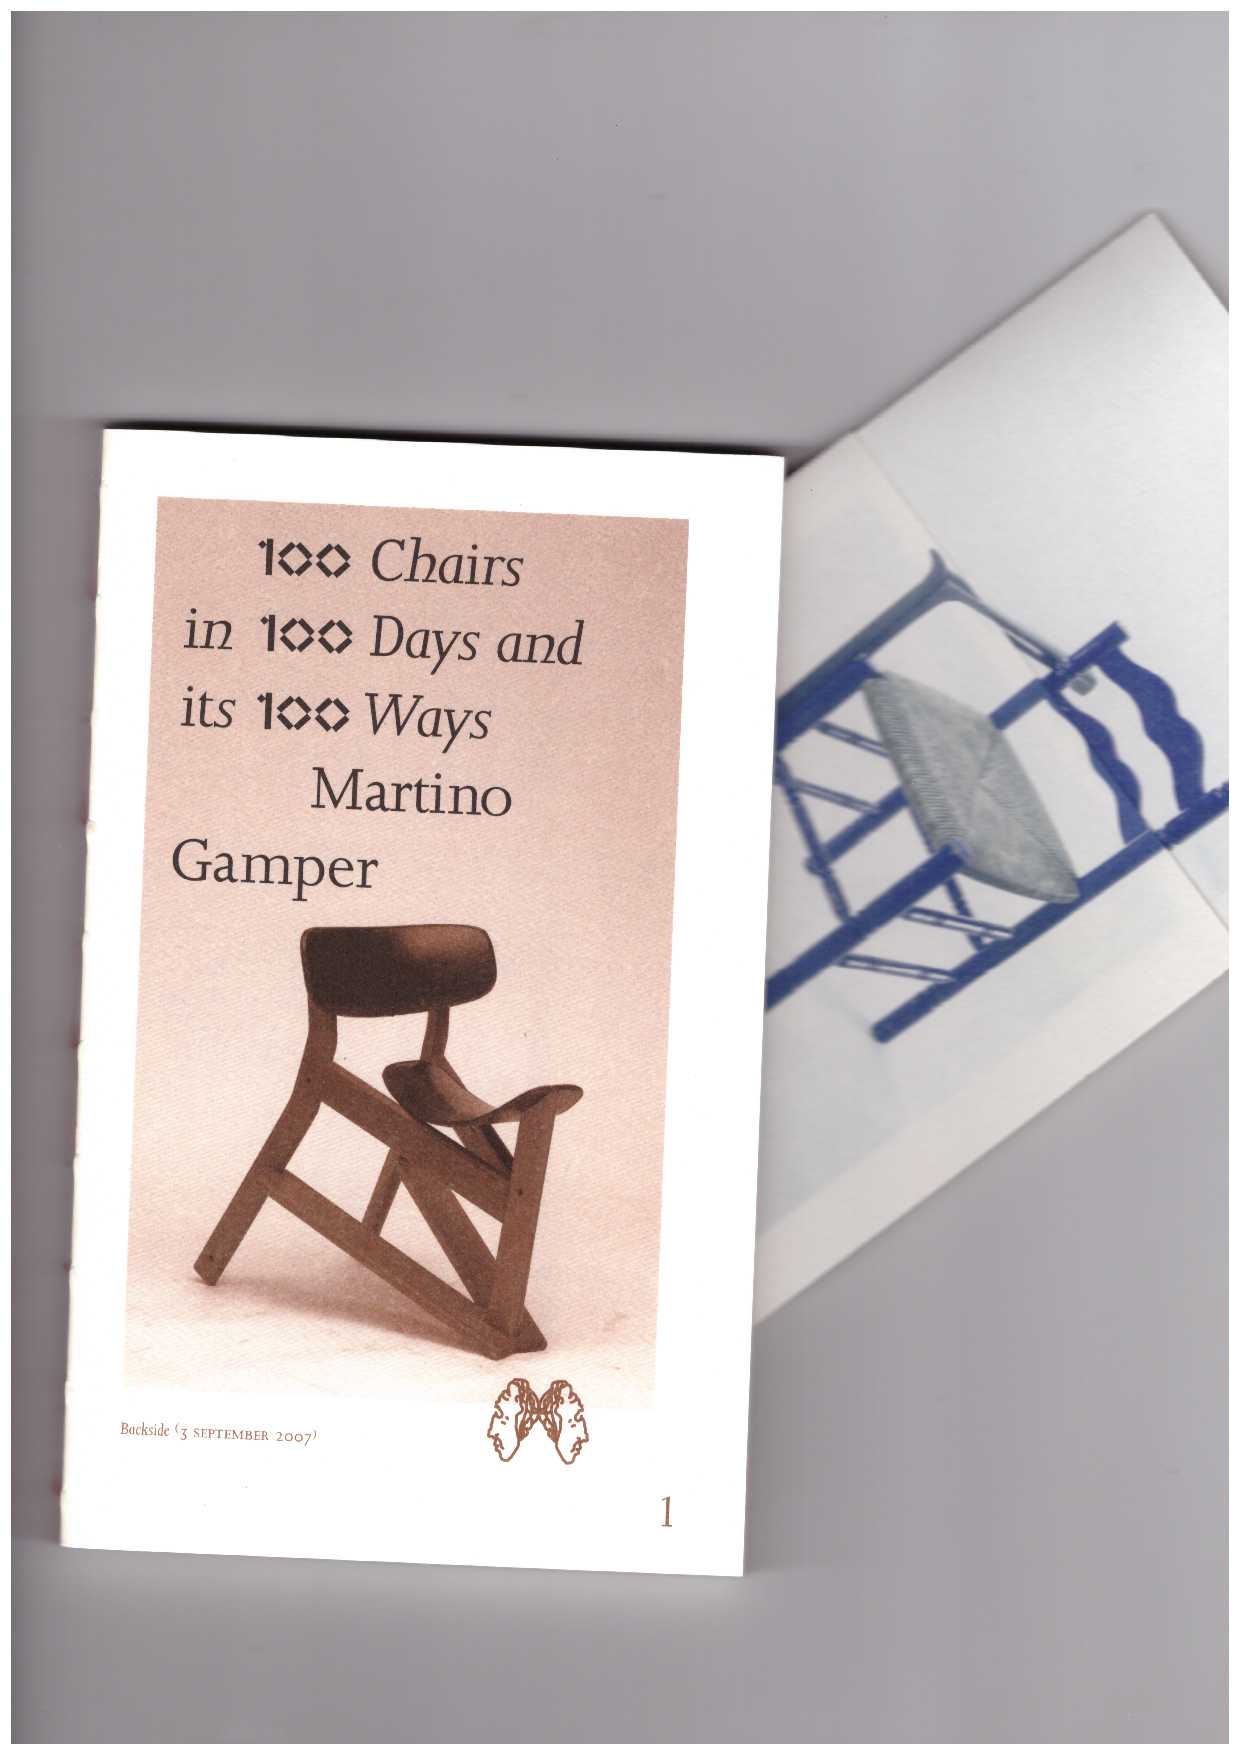 GAMPER, Martino - 100 Chairs in 100 Days and its 100 Ways (5th edition, 5th size)